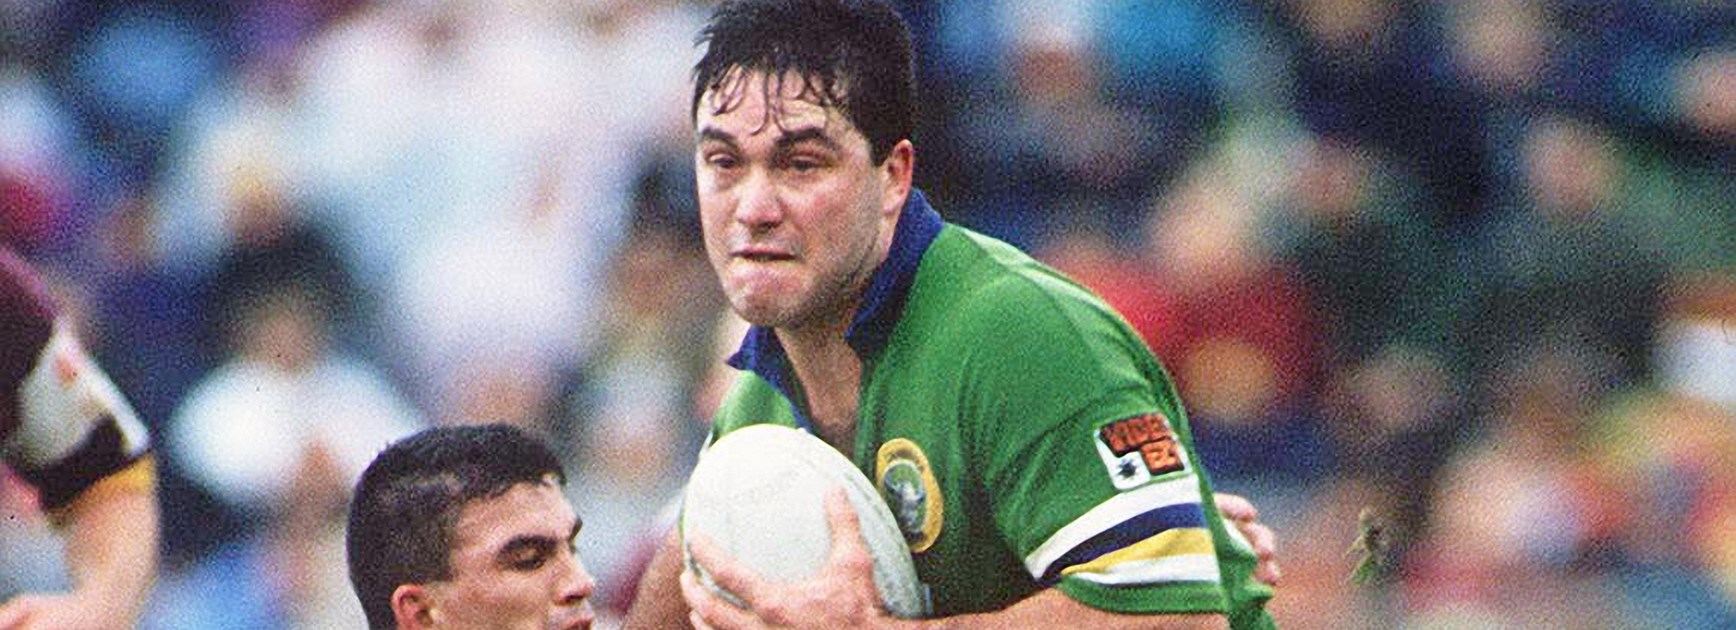 Bradley Clyde to be inducted into NSW Hall of Legends